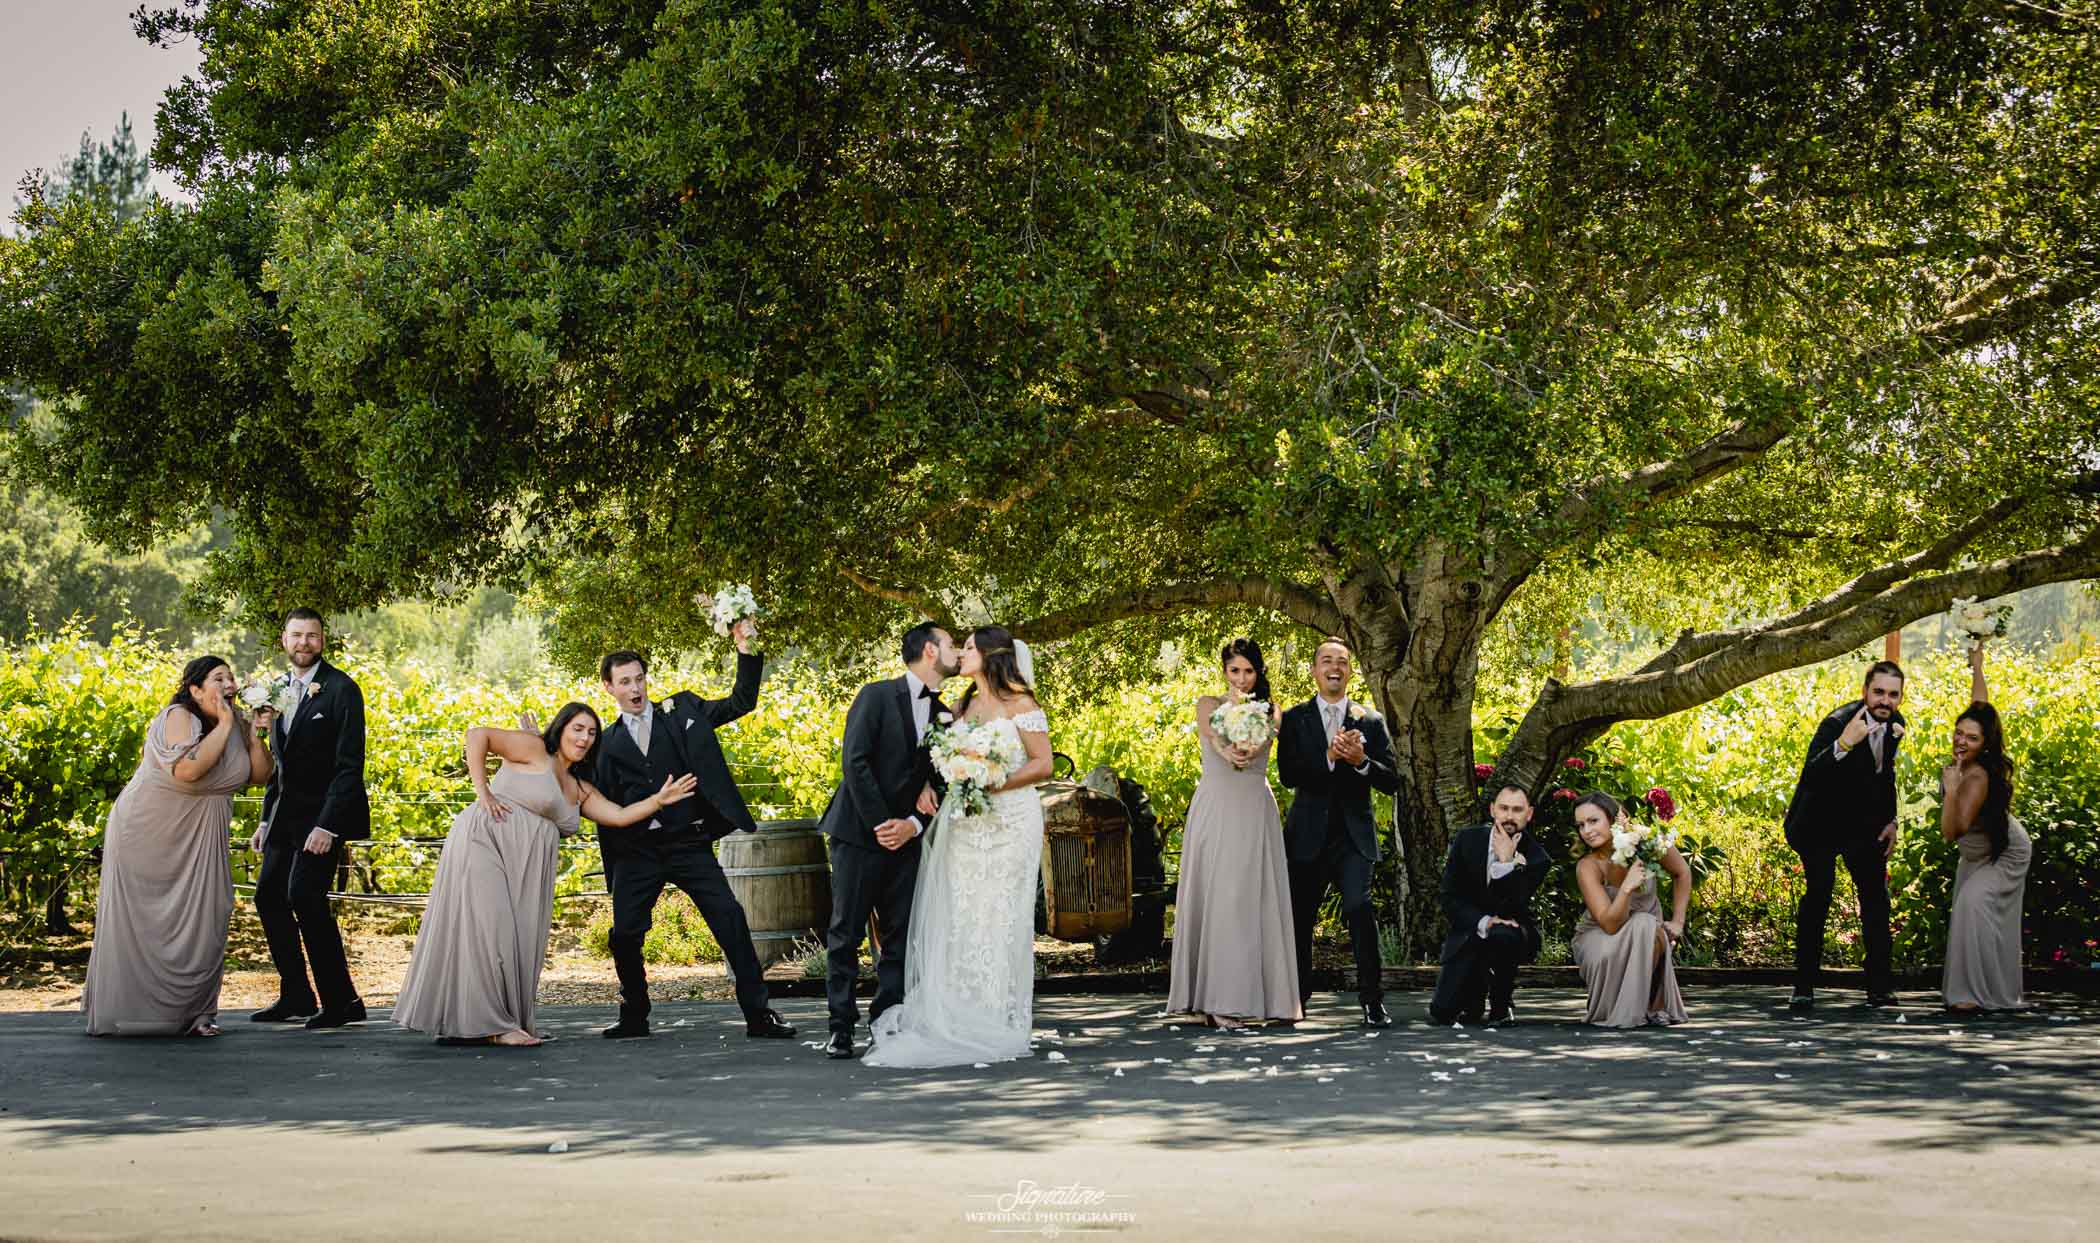 Wedding party funny poses outside under tree